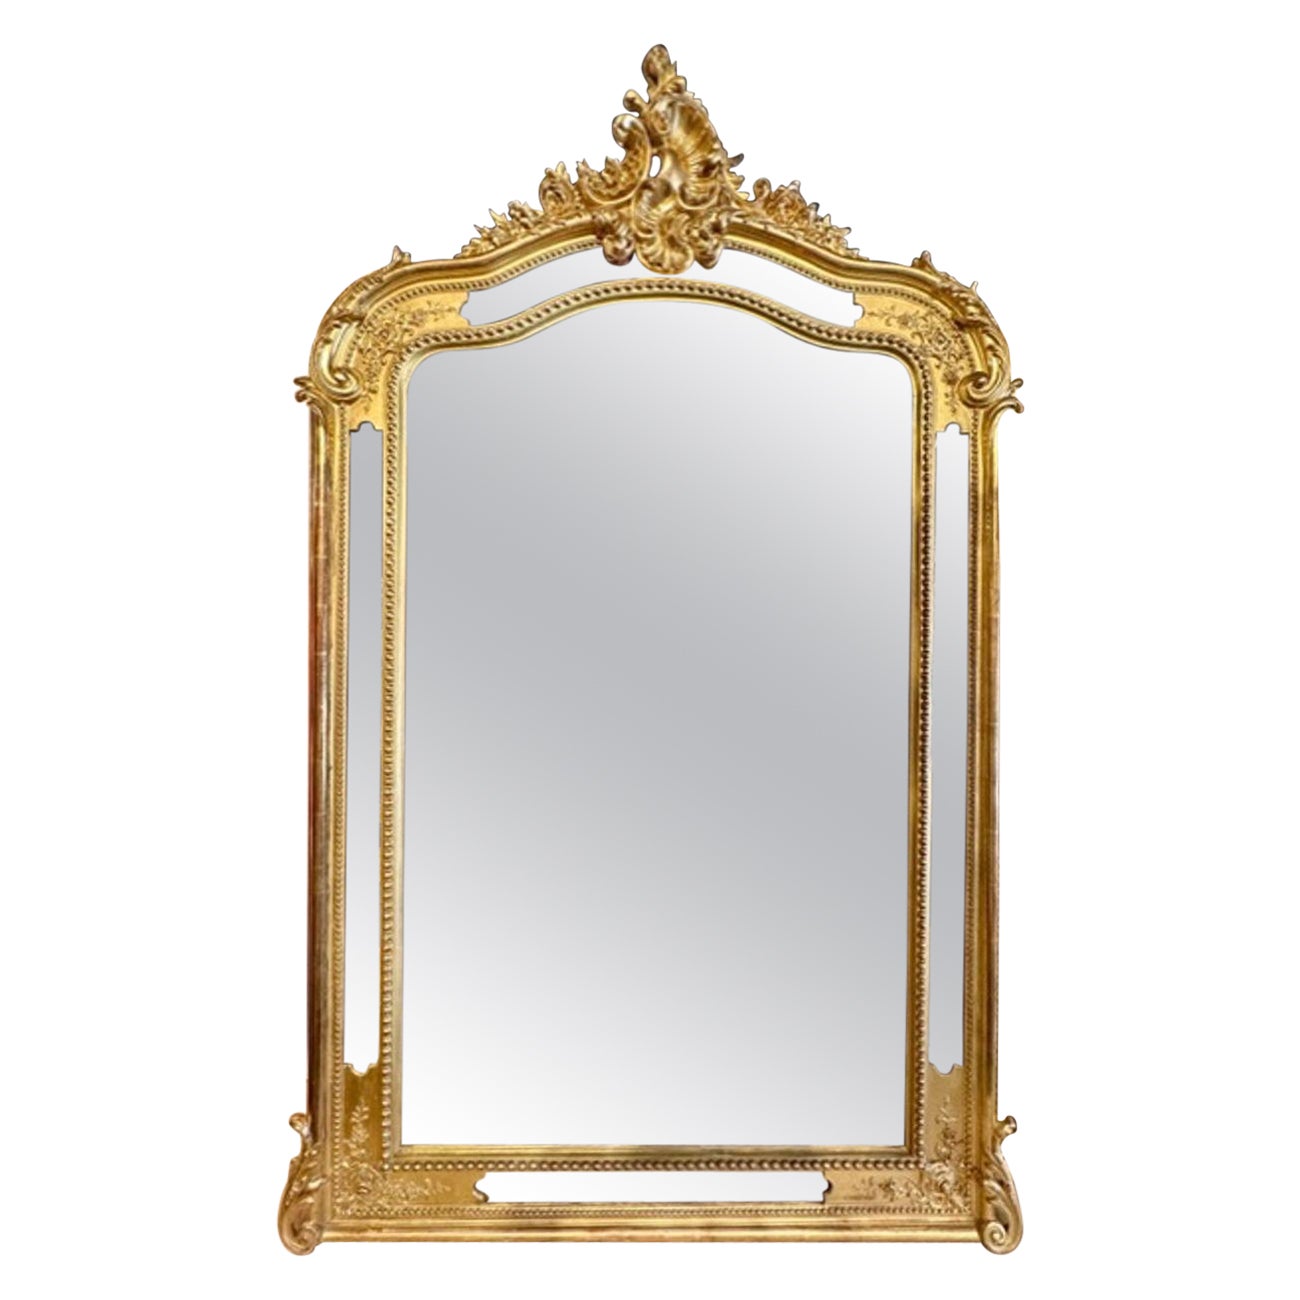 What is a giltwood mirror?